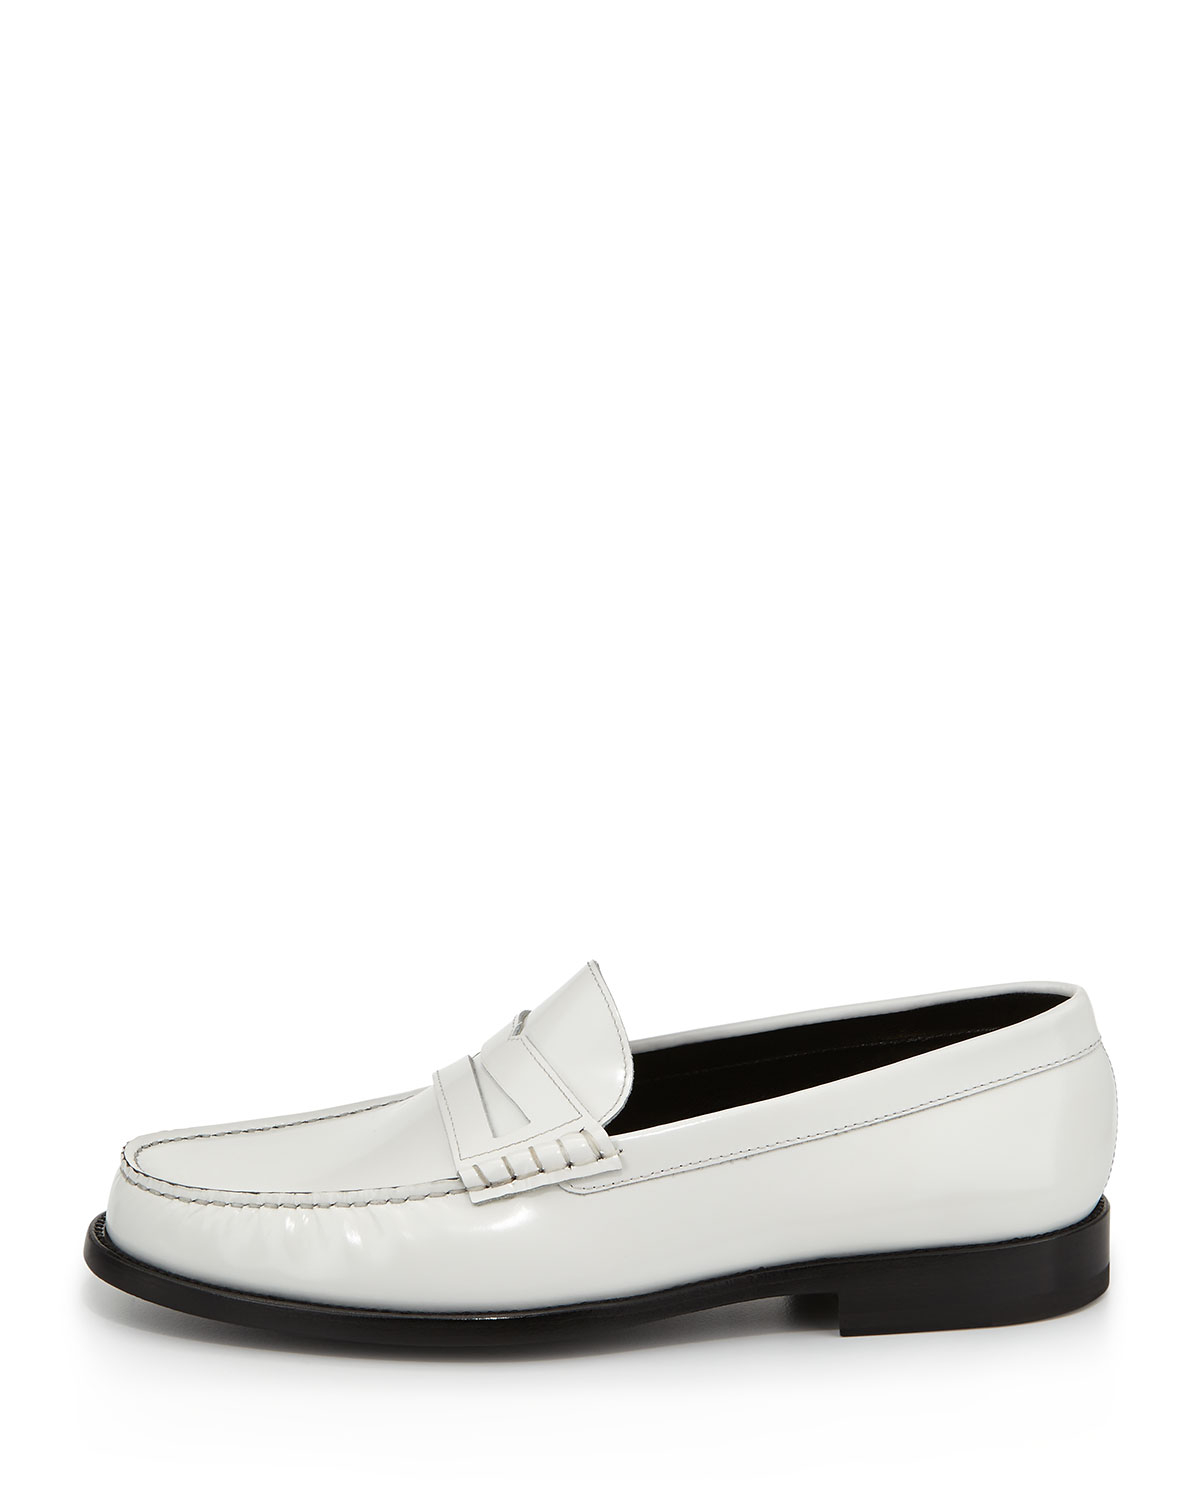 Saint Laurent Classic Leather Penny Loafer White in White for Men - Lyst